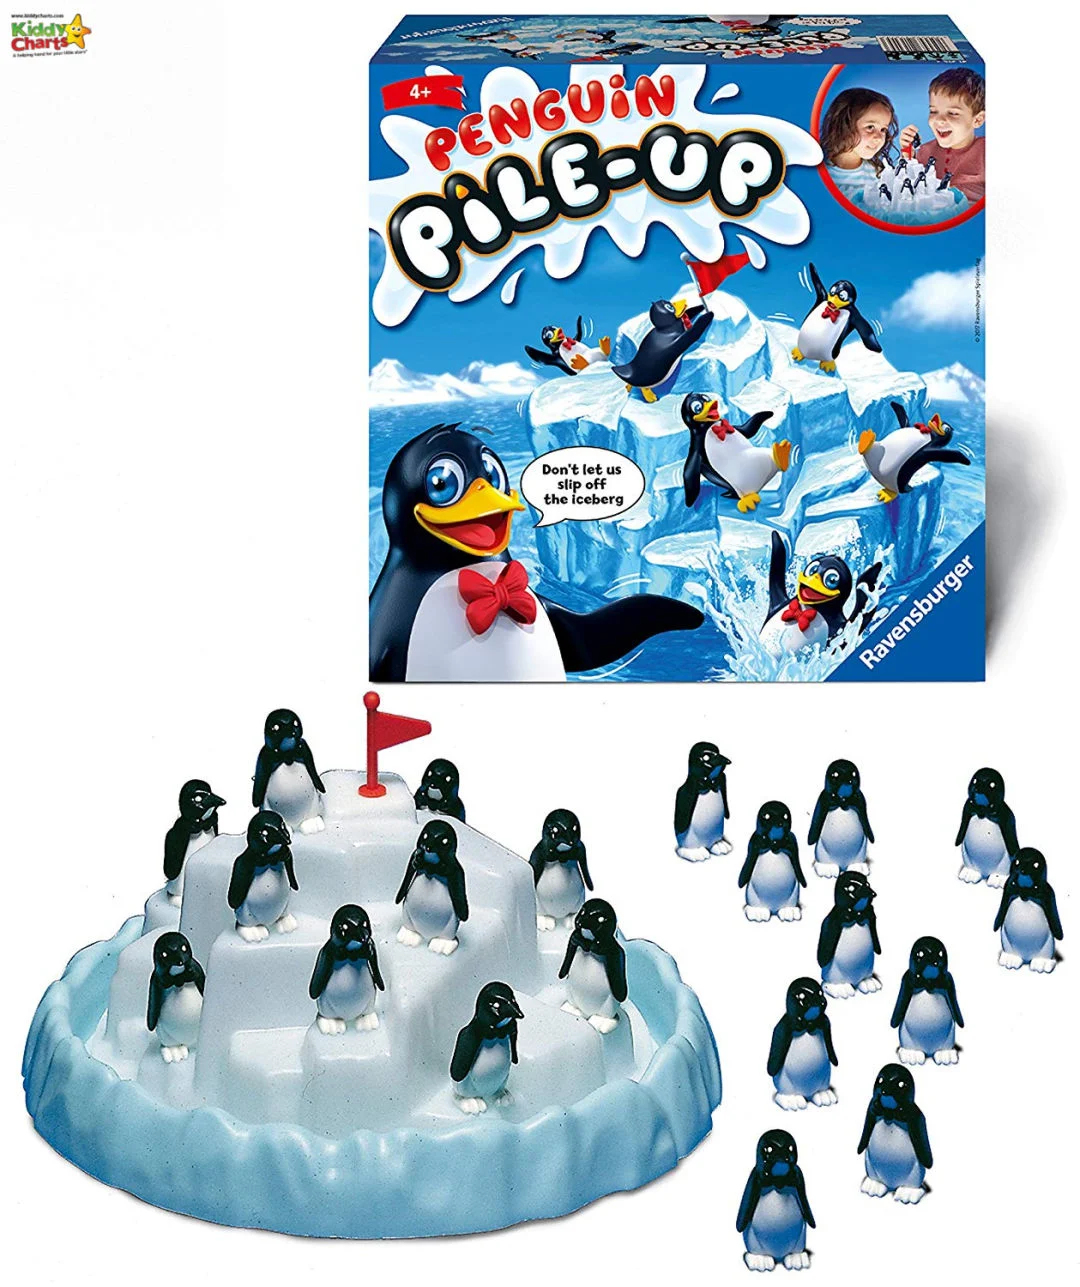 Penguin pile up game - boredom busters gift guide